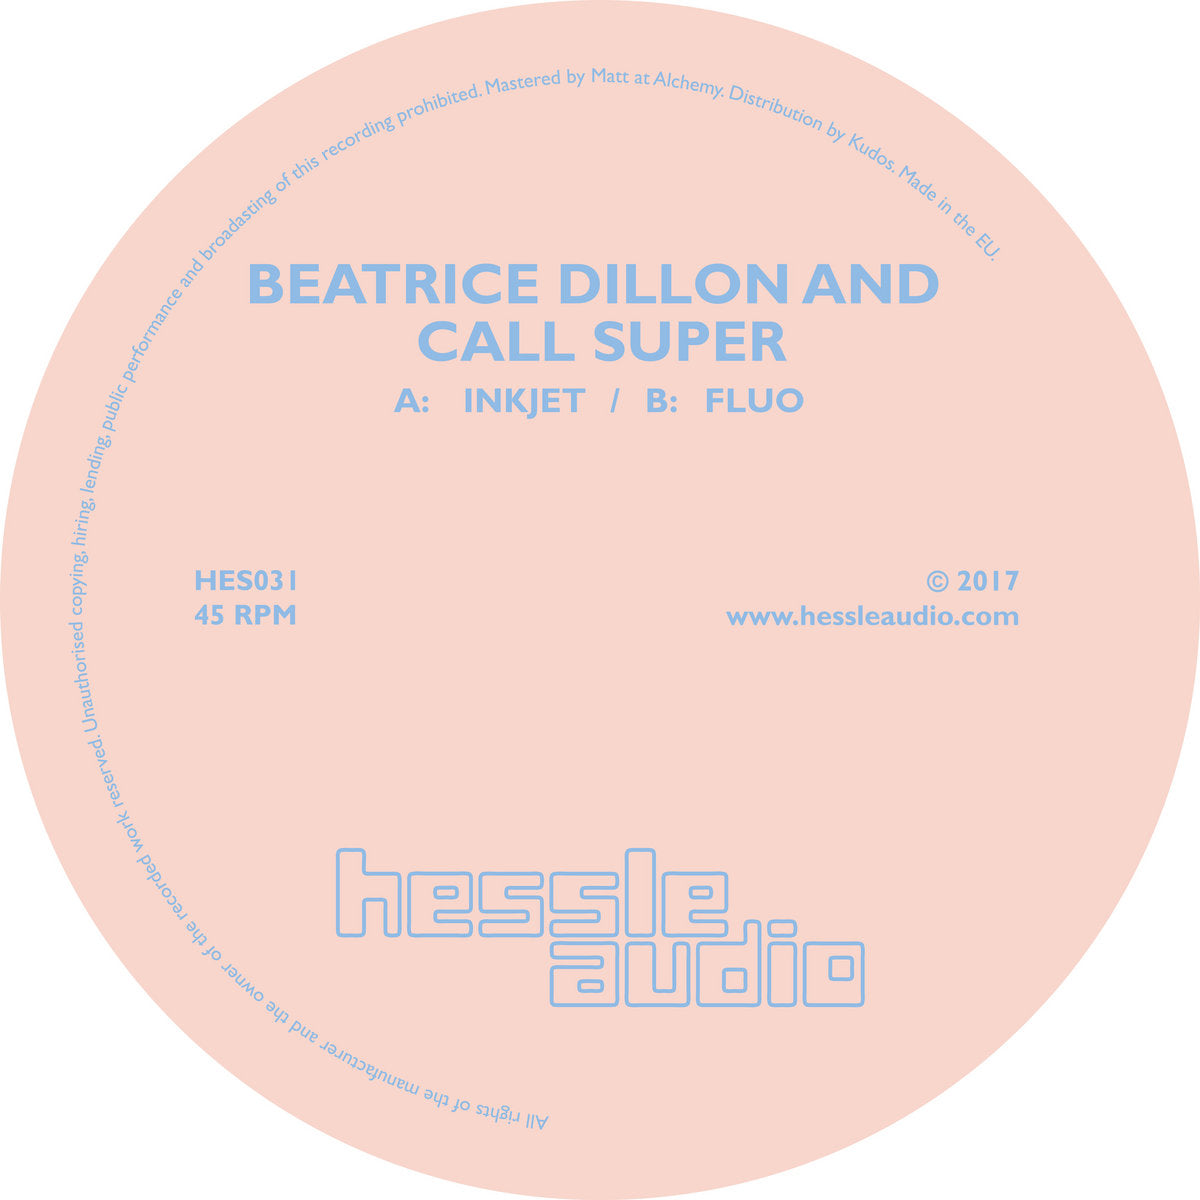 Beatrice Dillon and Call Super - Inkjet Fluo